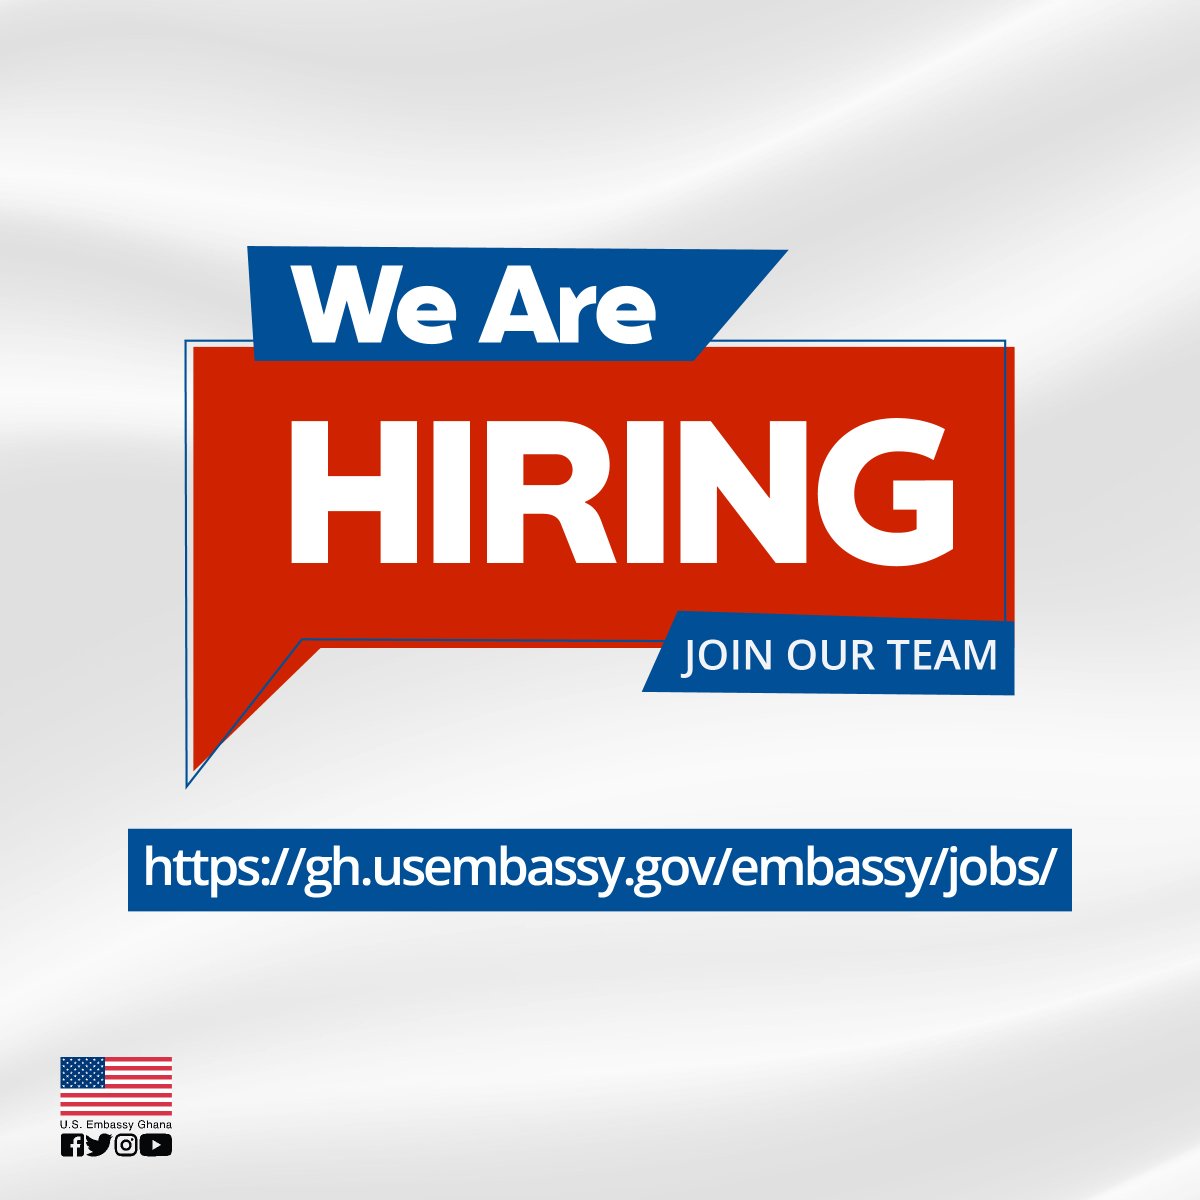 The U.S. Mission in Ghana is seeking eligible and qualified applicants for the position of Senior Protocol Assistant. CLICK on the link for more information and application: bit.ly/EmbassyJobs